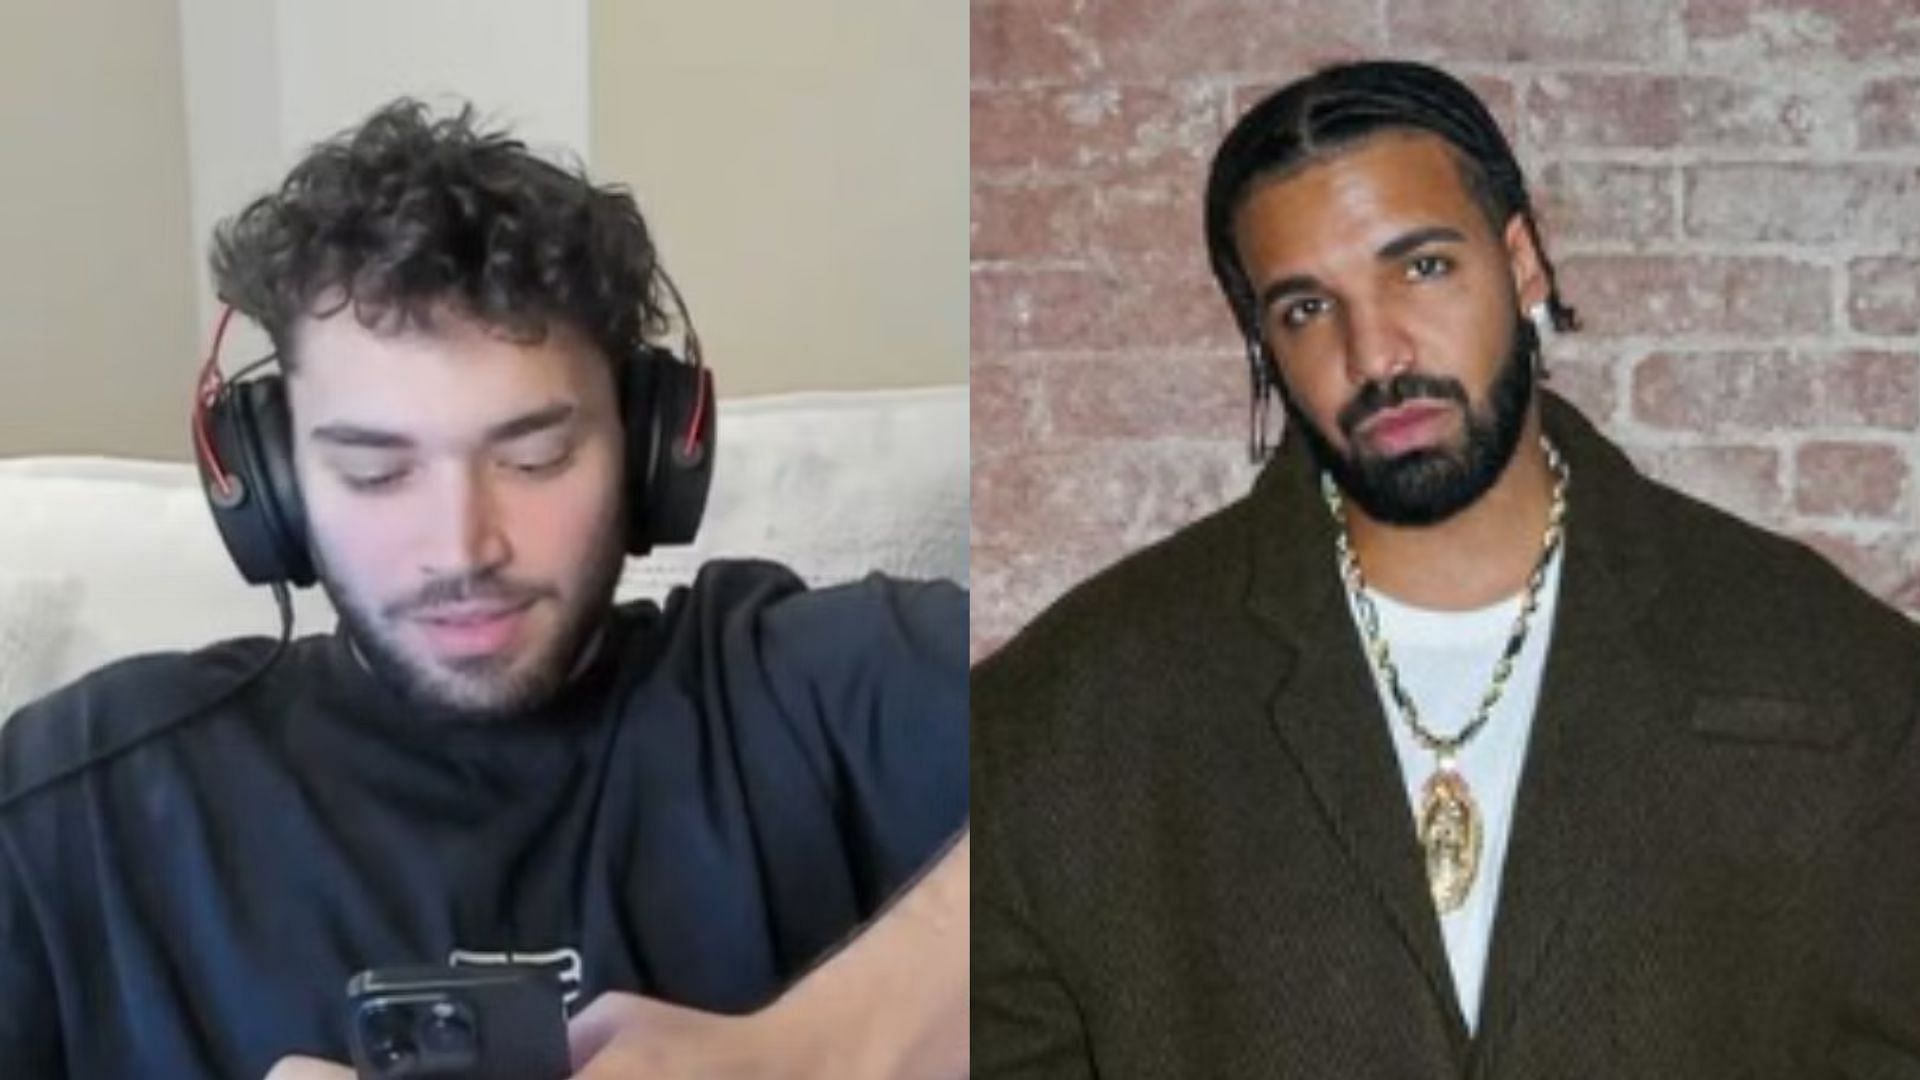 Adin Ross reacts to Drake